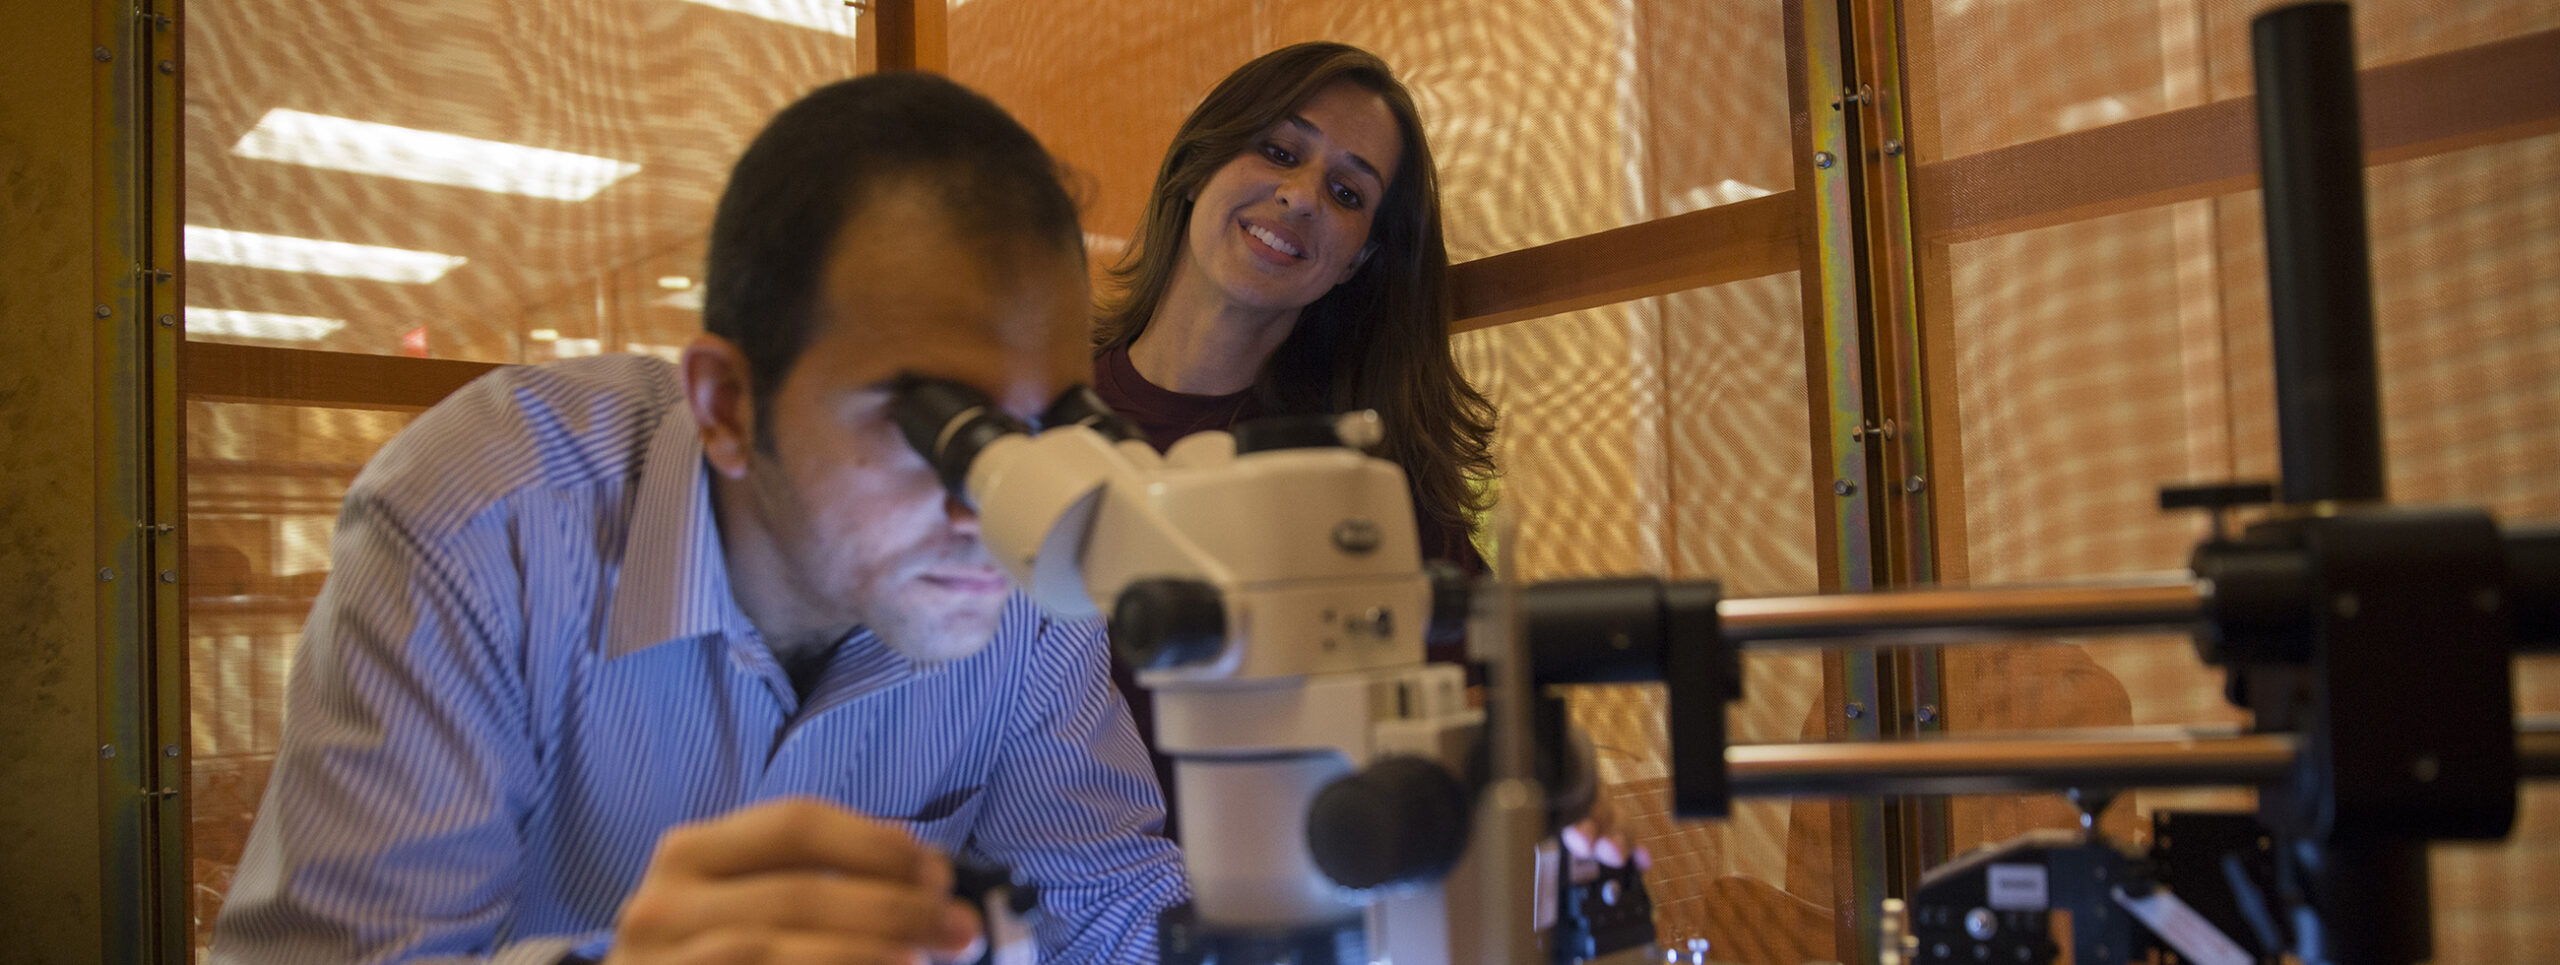 A man looks through a microscope while a woman looks on behind him